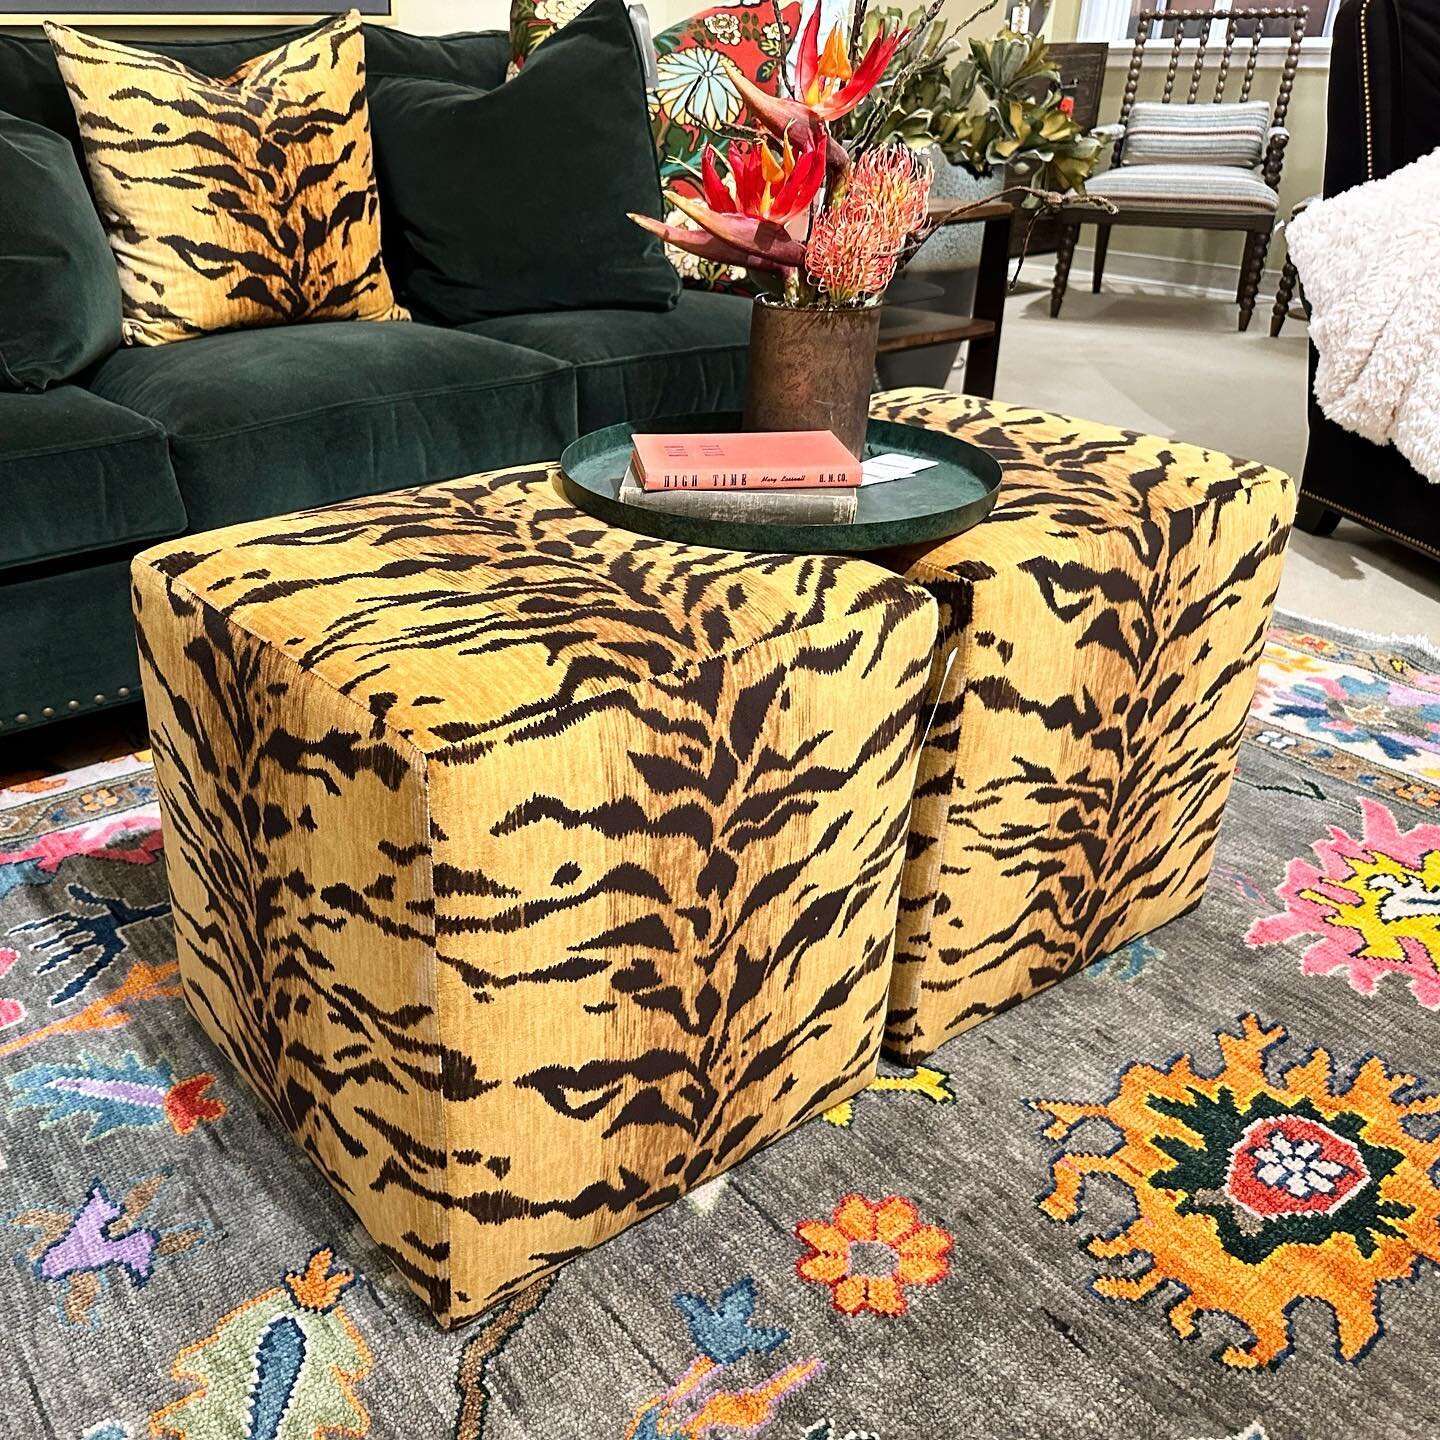 Ottomans are a great way to bring in color and pattern as well as extra seating in a pinch! We offer a variety of different sizes, shapes, and colors in our showroom!